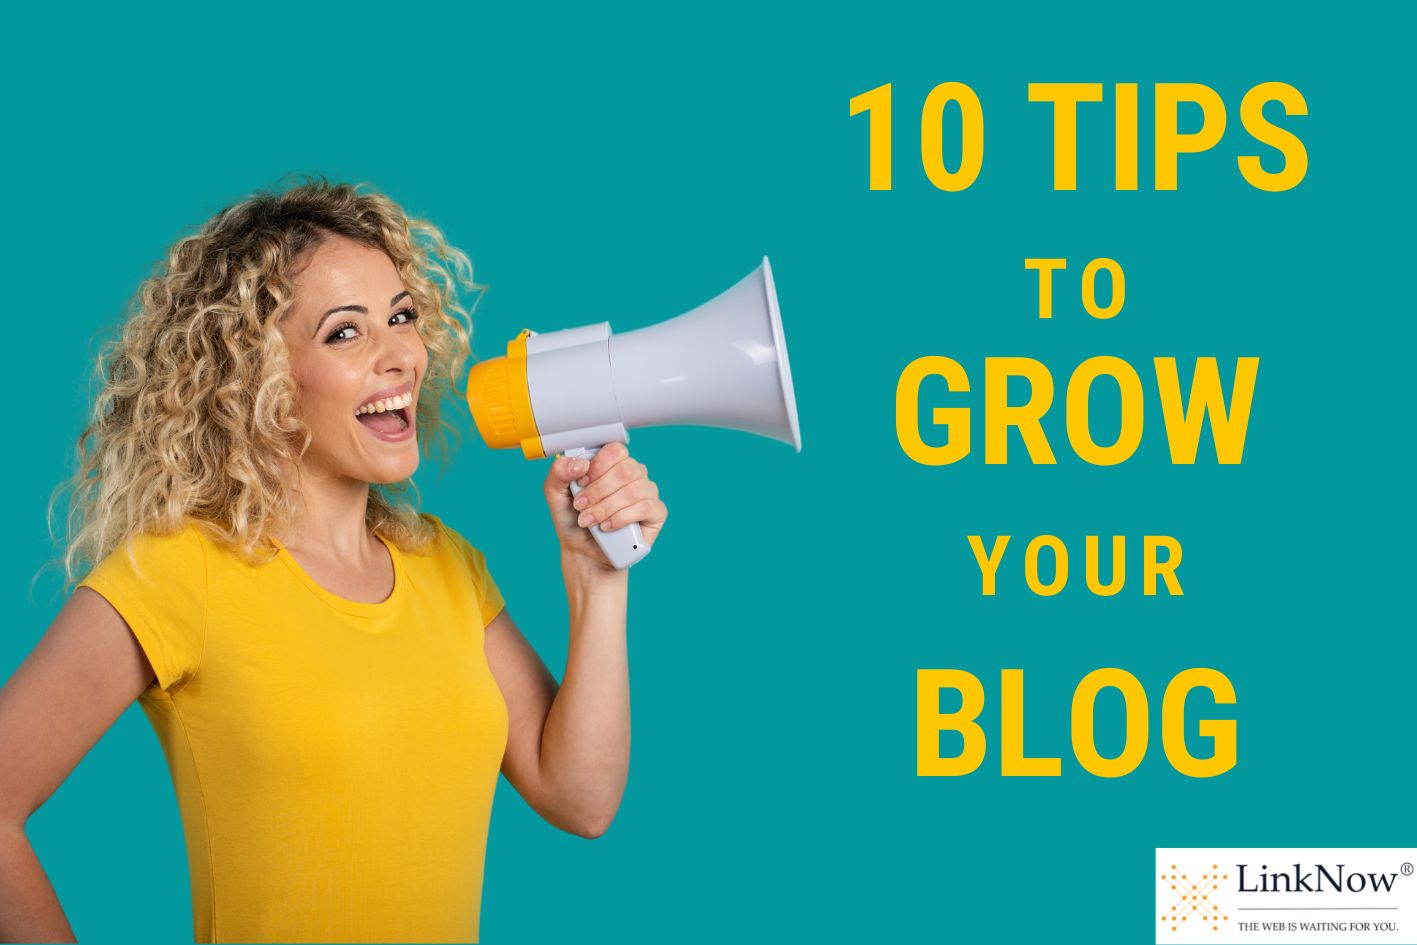 A woman, smiling, holds a megaphone to her mouth. Caption says: 10 tips to grow your blog.